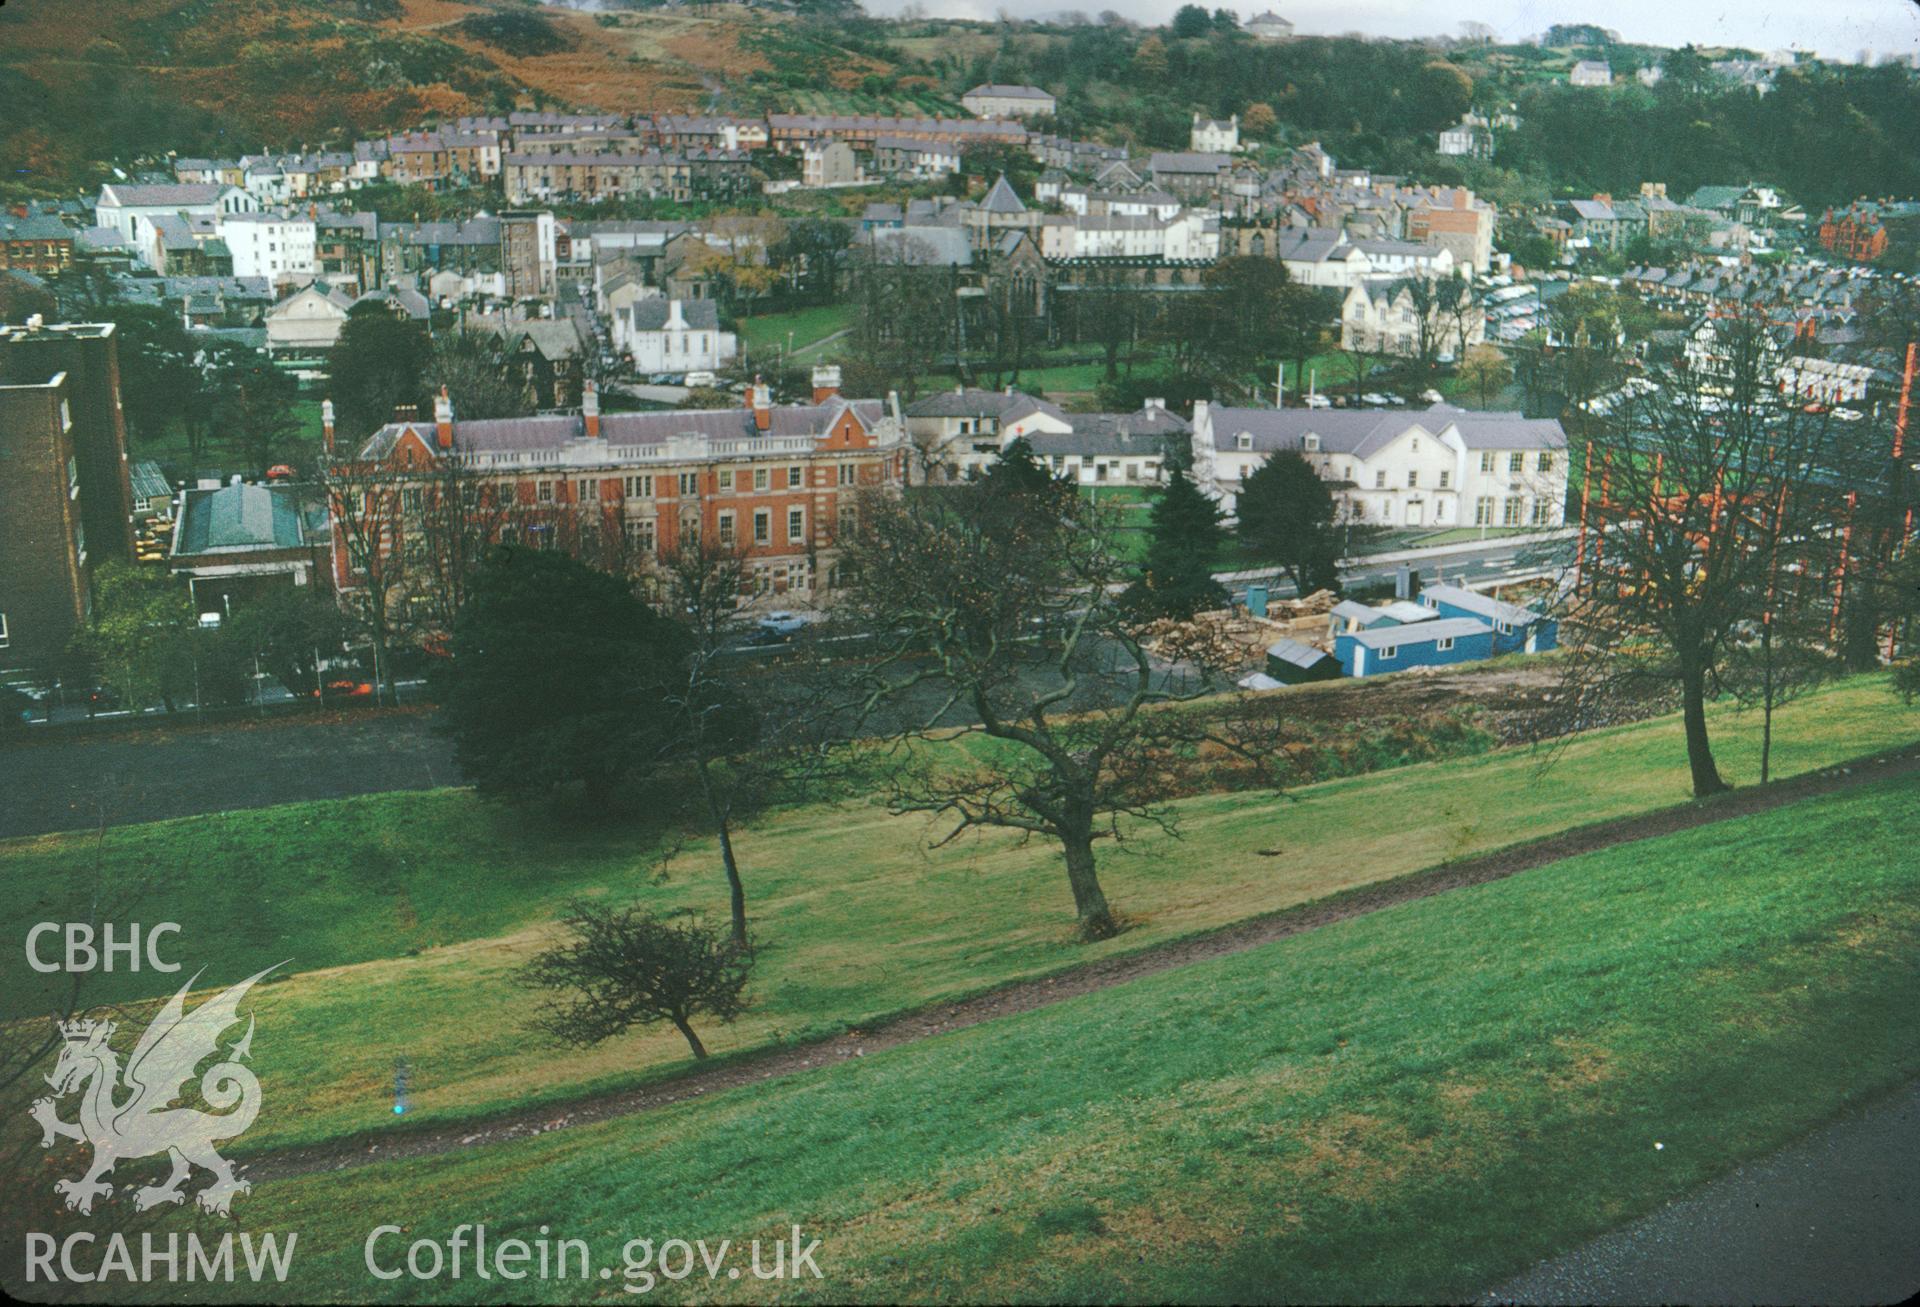 Colour slide showing site of Celtic monastery at Bangor.